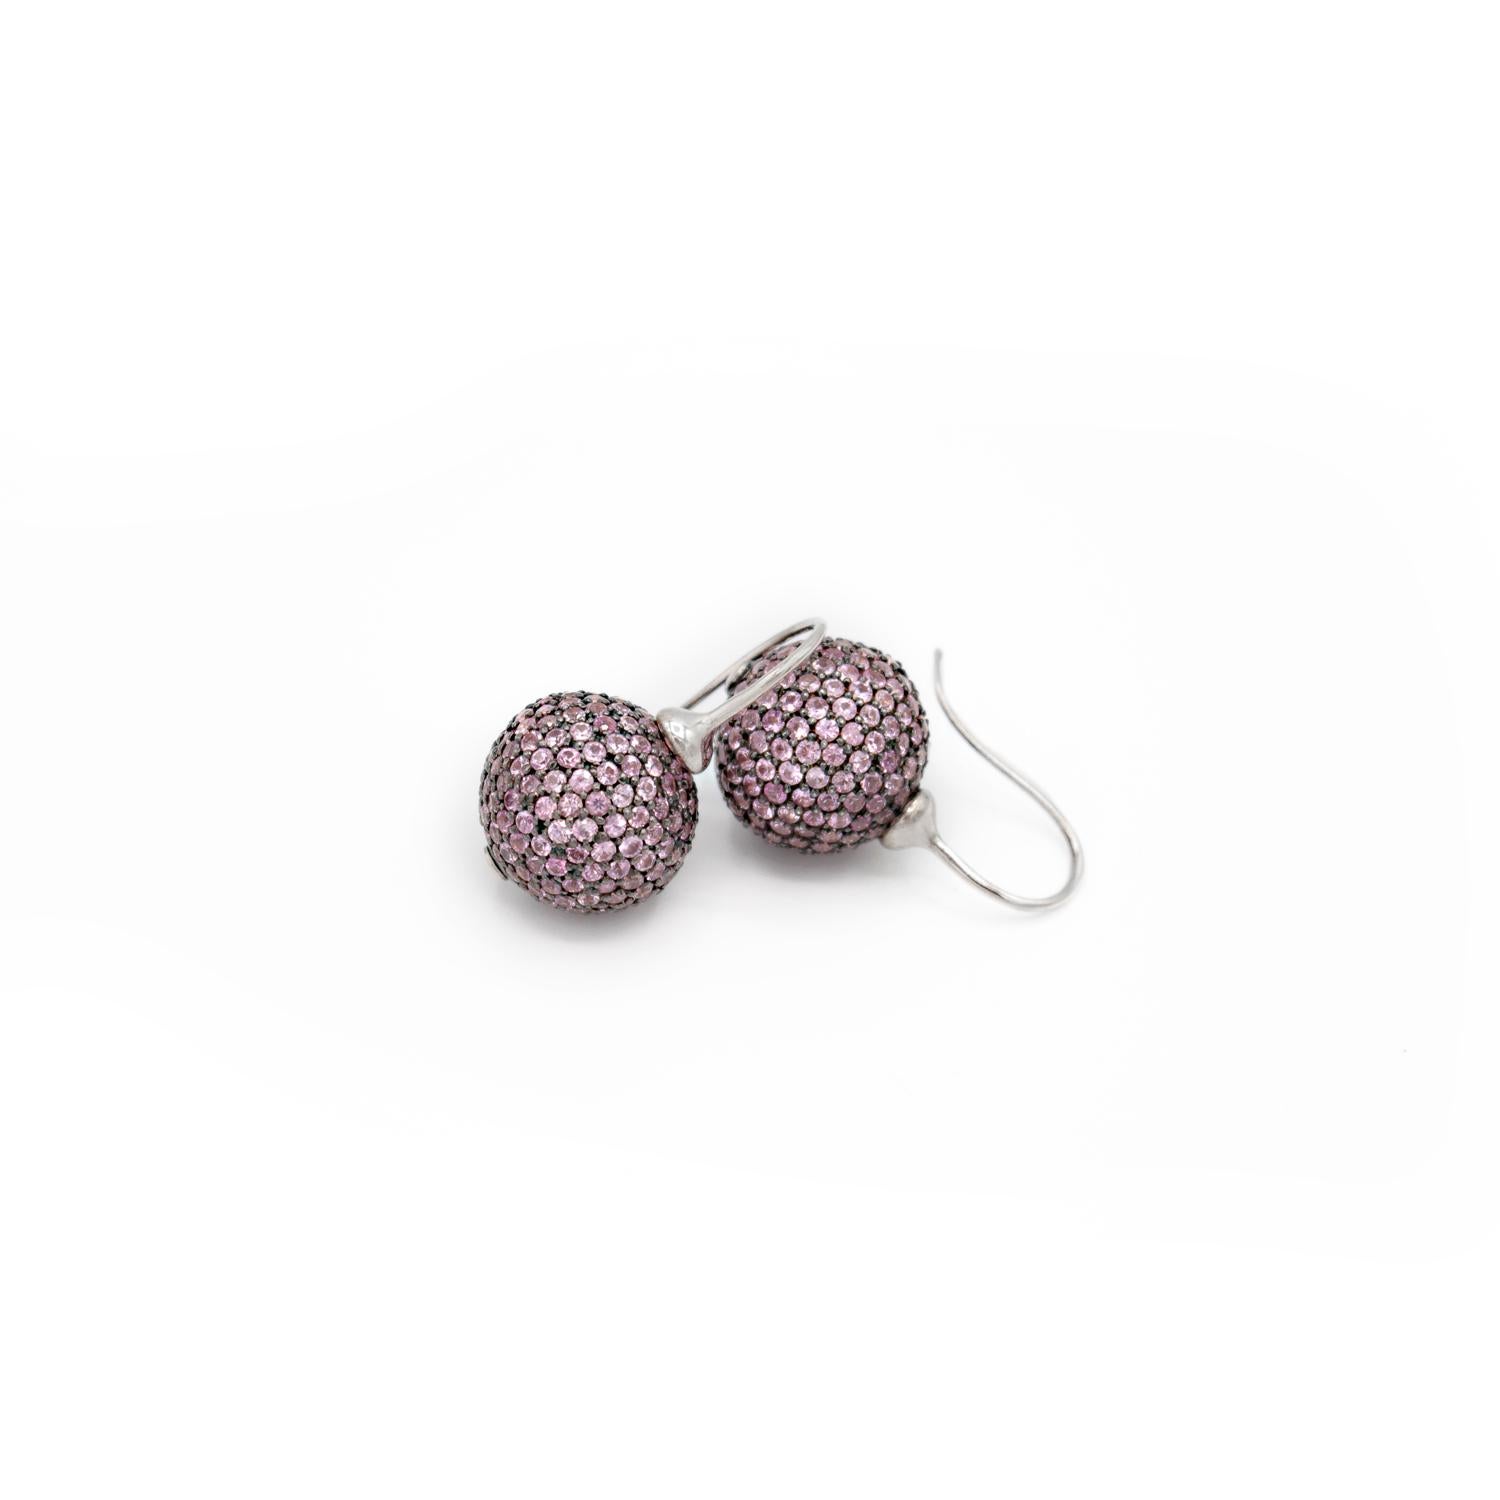 Elegant earrings in 18kt white gold and pink sapphires . 
Silver setting
Pink sapphires ct. 6,5
white Gold g. 2,2
Hook System

